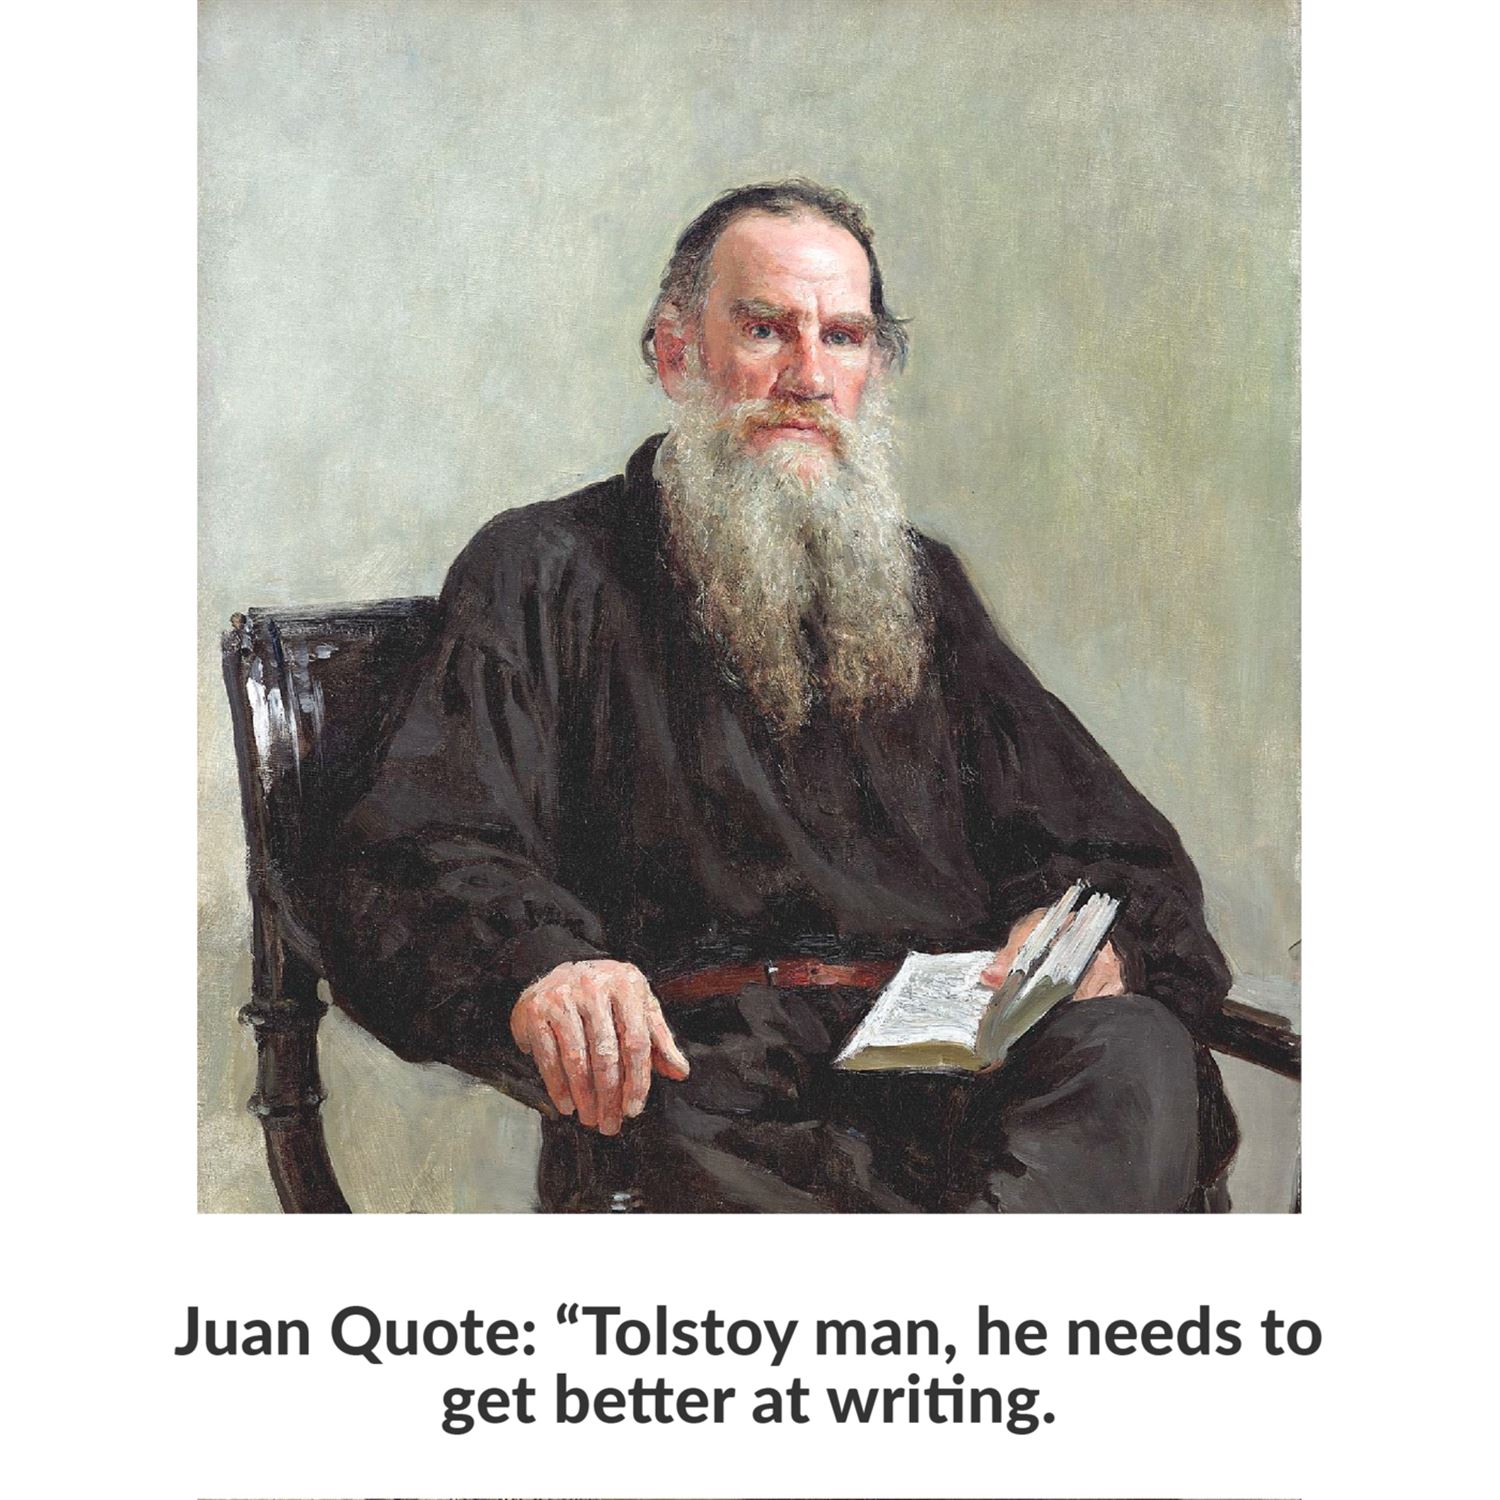 Tolstoy needs to get better at writing